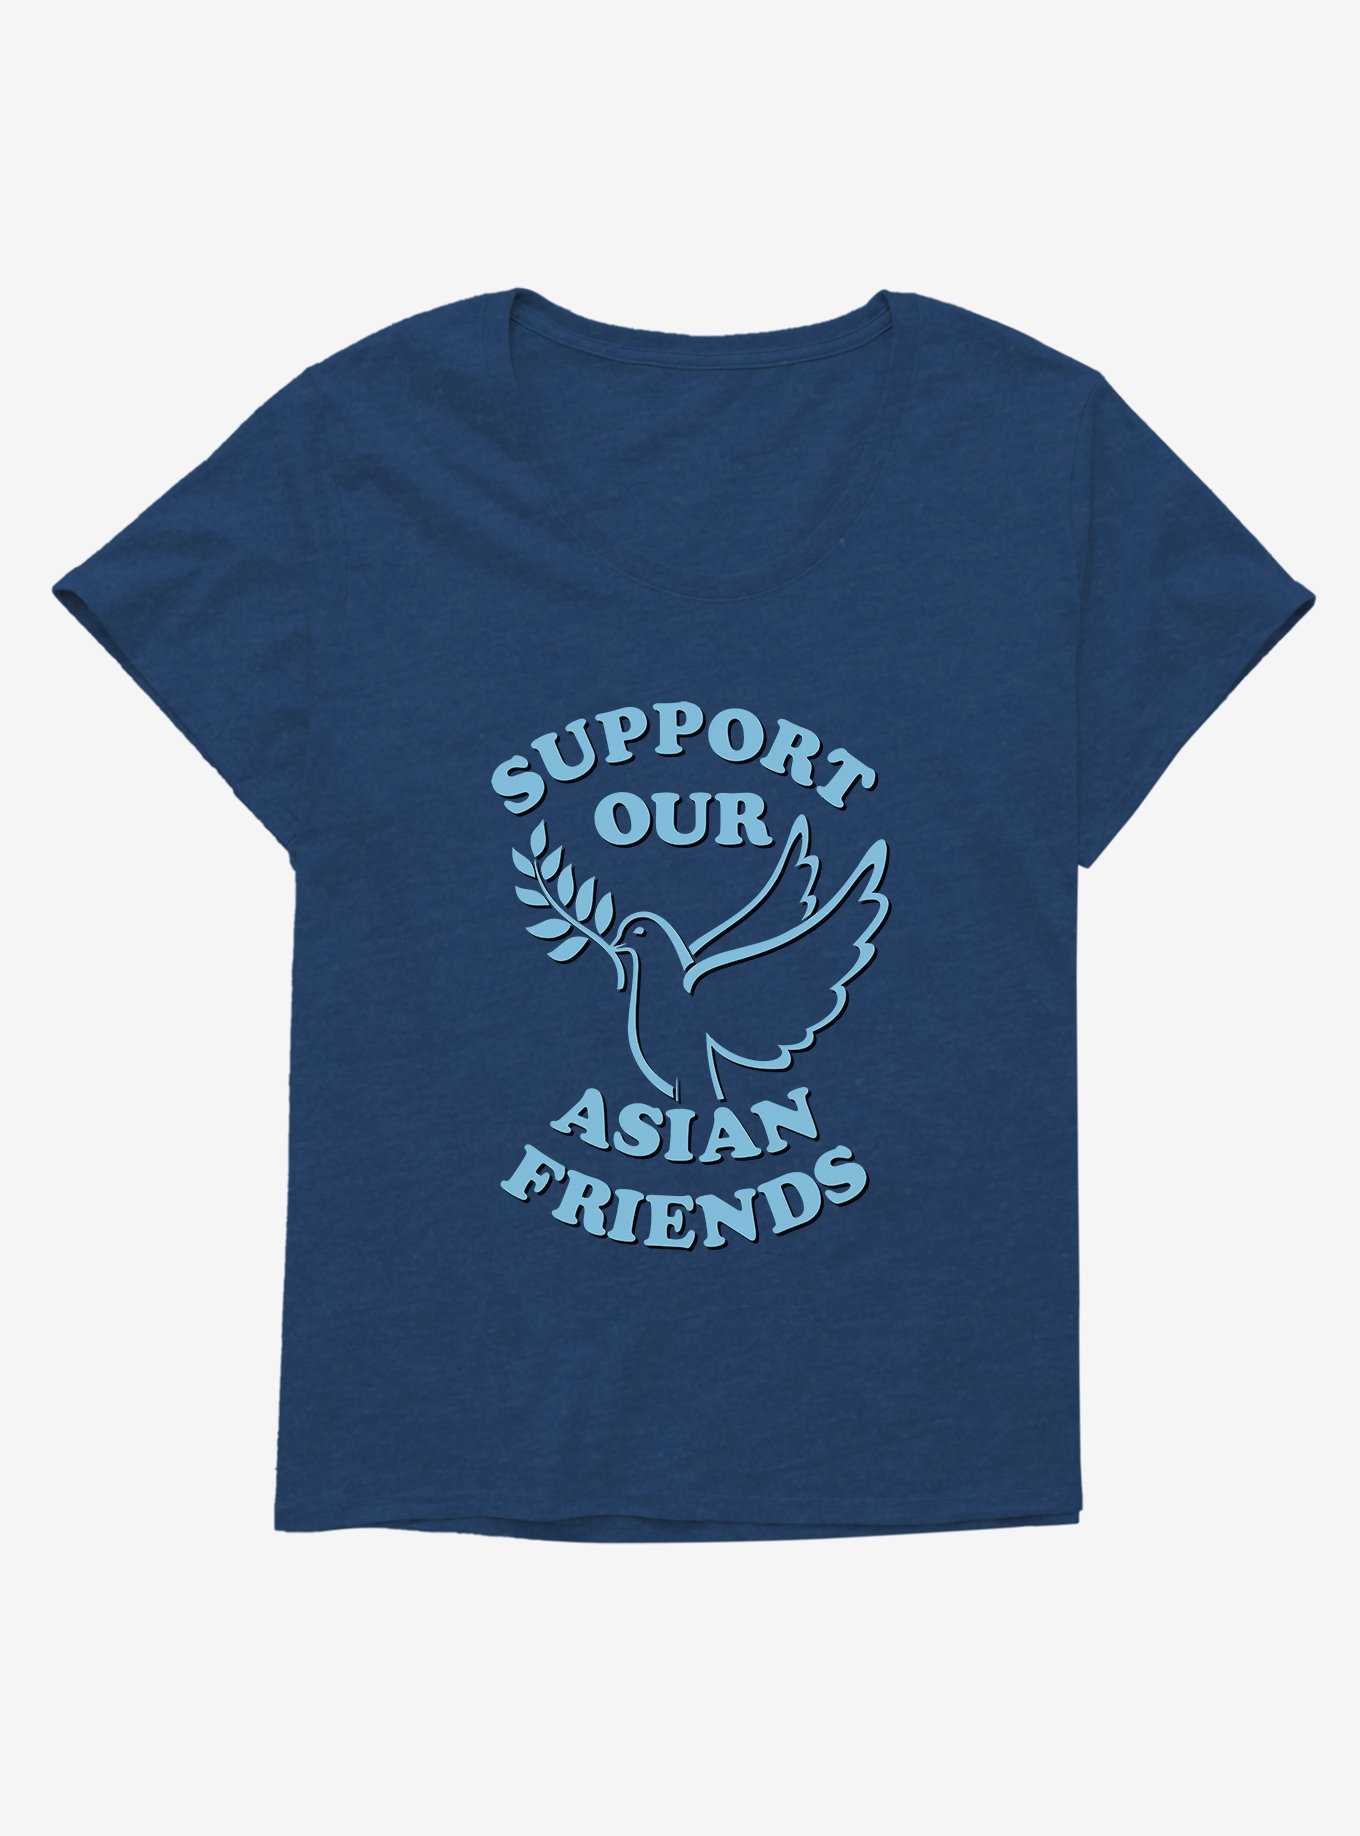 Support Our Asian Friends Girls T-Shirt Plus Size, , hi-res